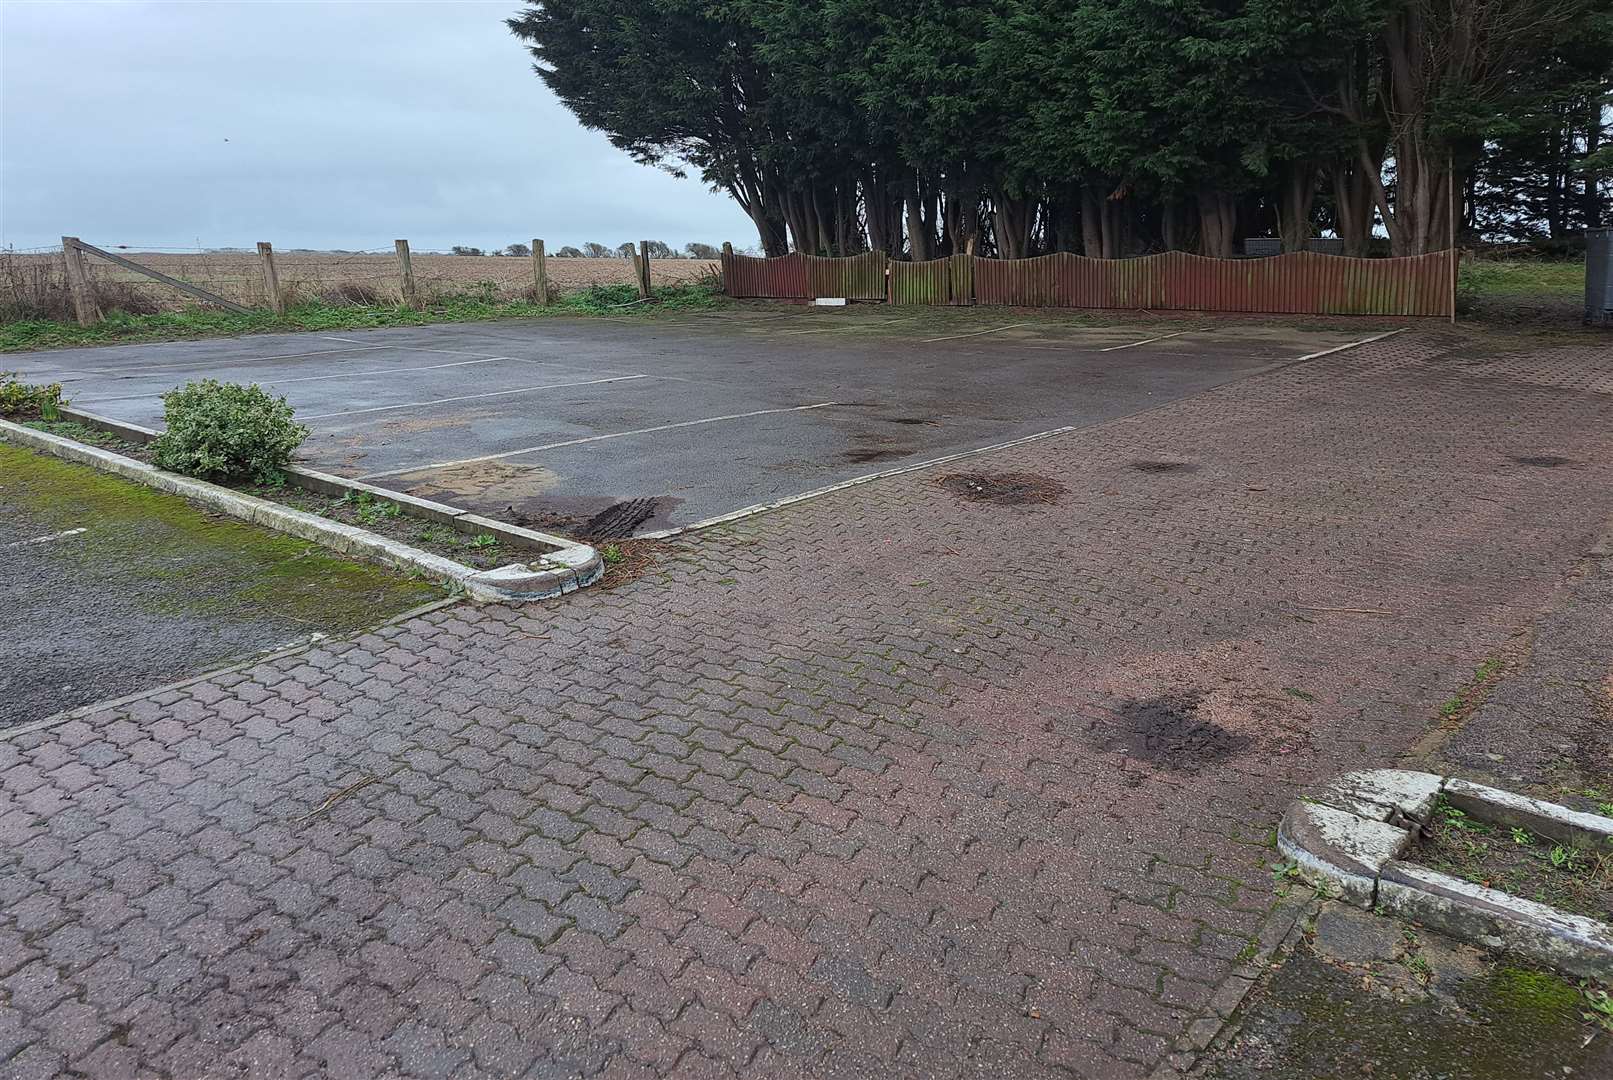 The car park of The Swingate Inn which the licensee says is being misused by non-customers